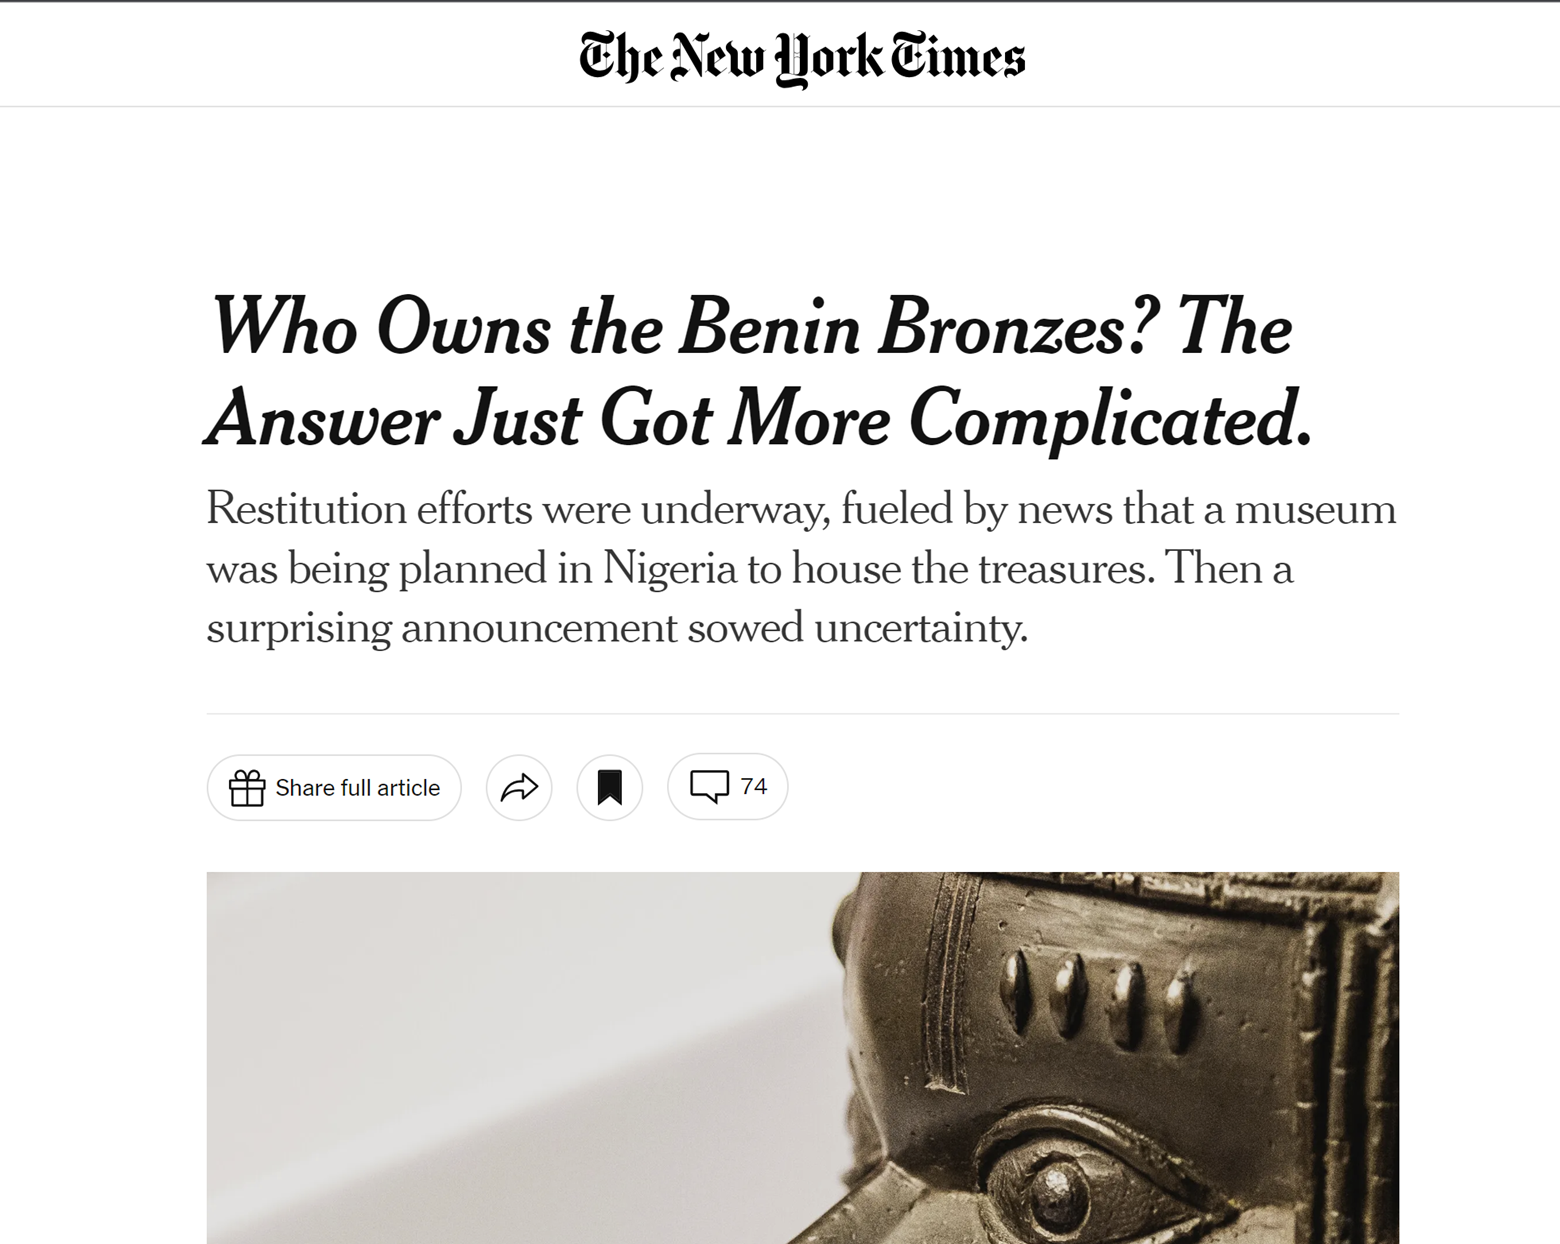 New York Times article on President Buhari changing the ownership of Benin Bronzes and the international fallout that ensued